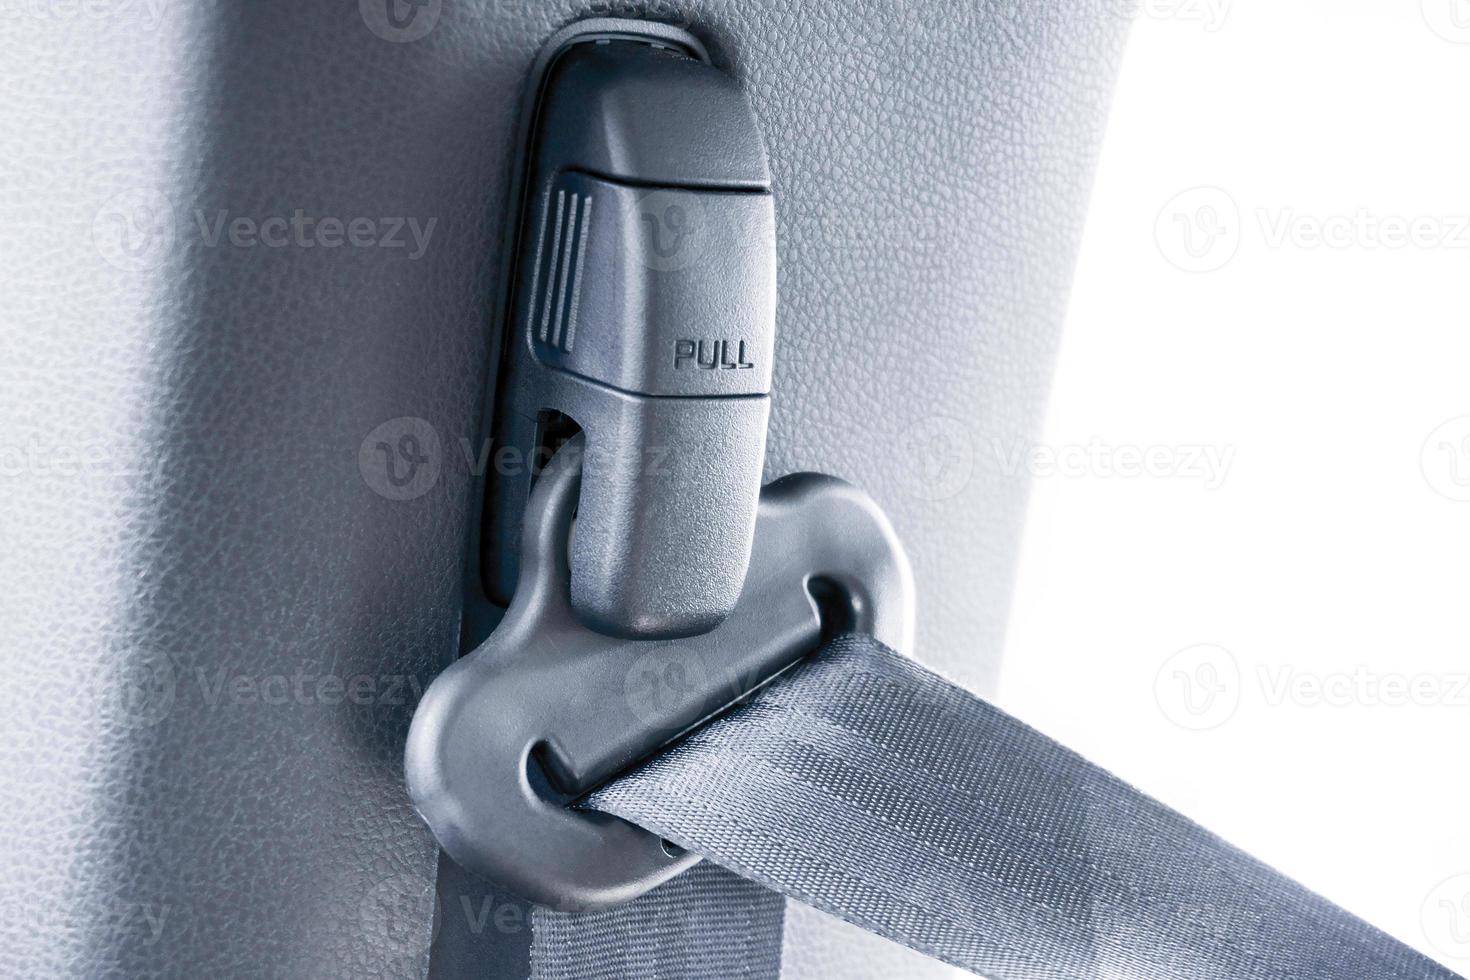 Pull safety belt in car photo